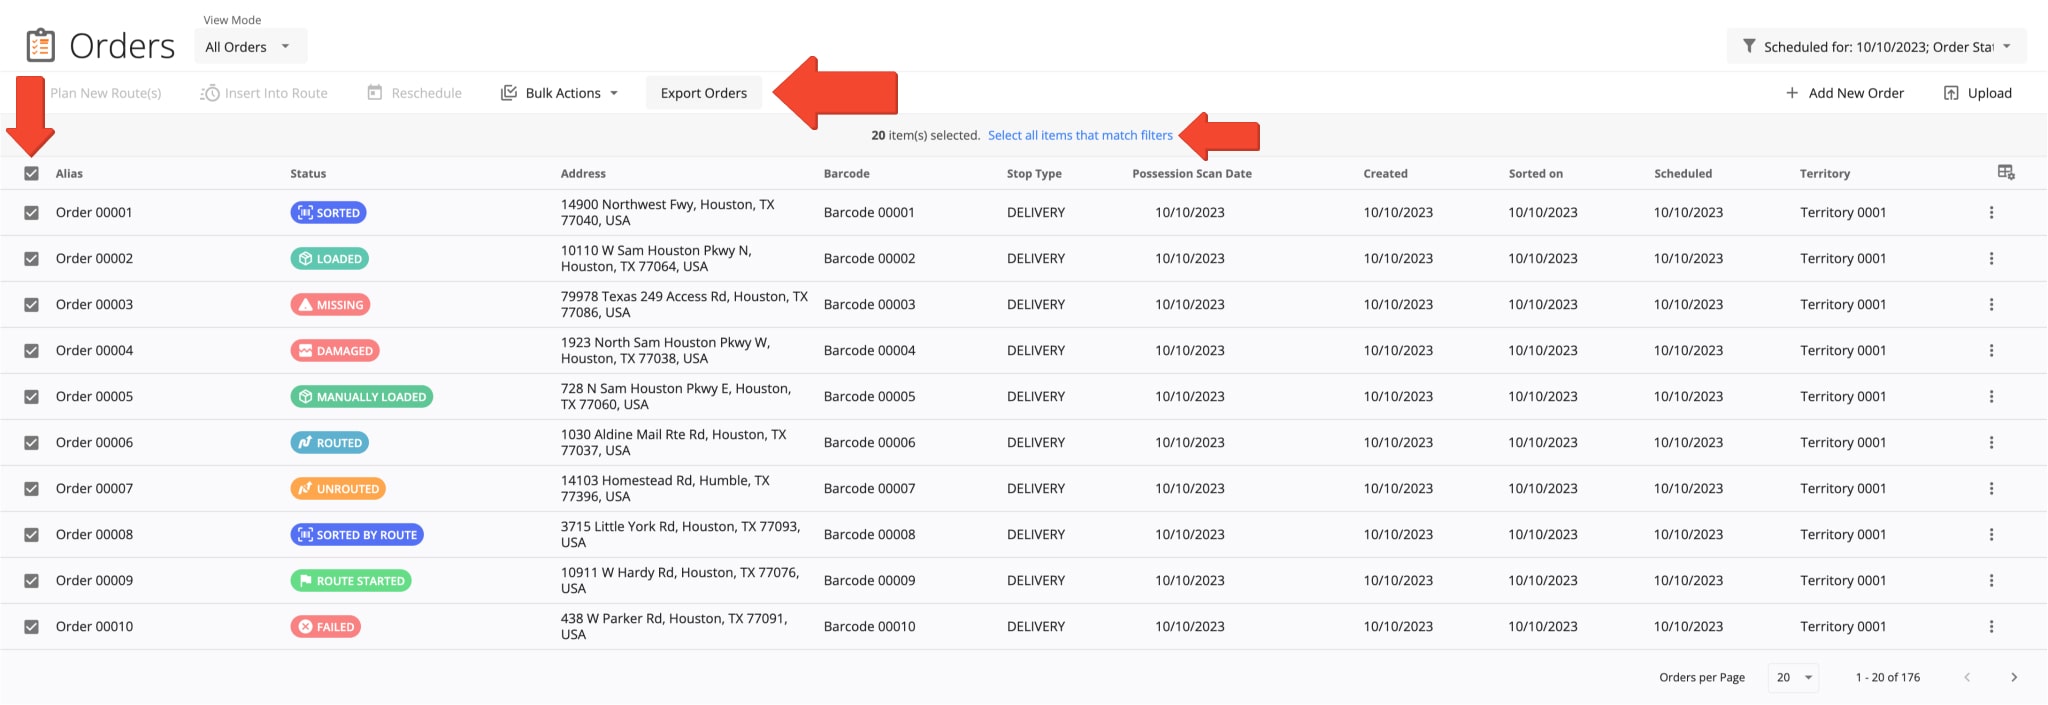 Select orders by checking the boxes next to them and then export selected orders as a CSV order report file.